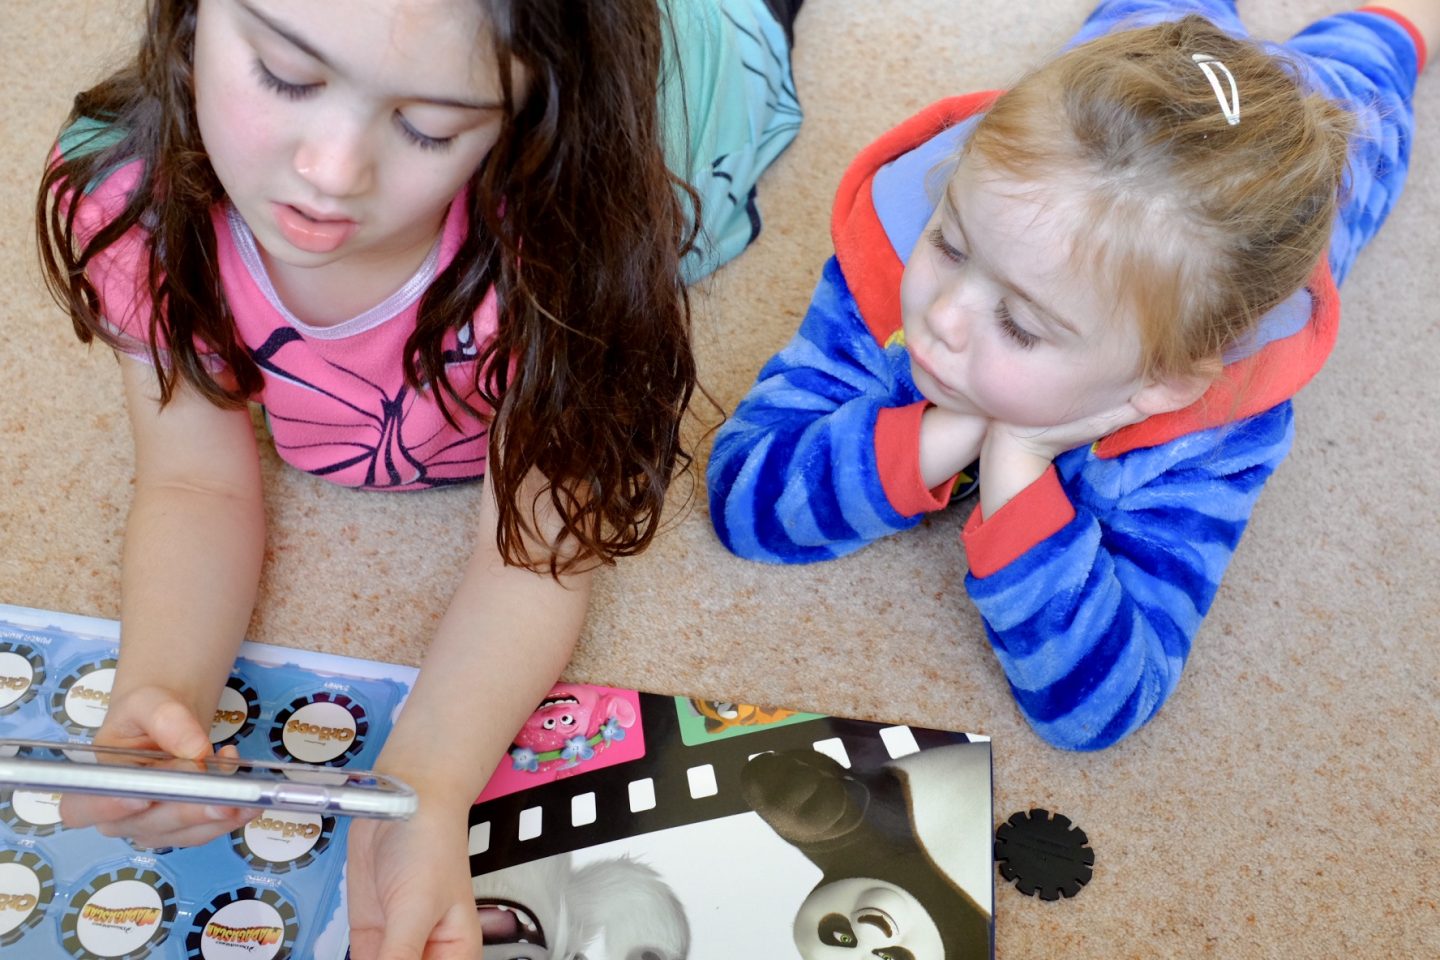 Girls playing with Augmented reality discs - AR discs 